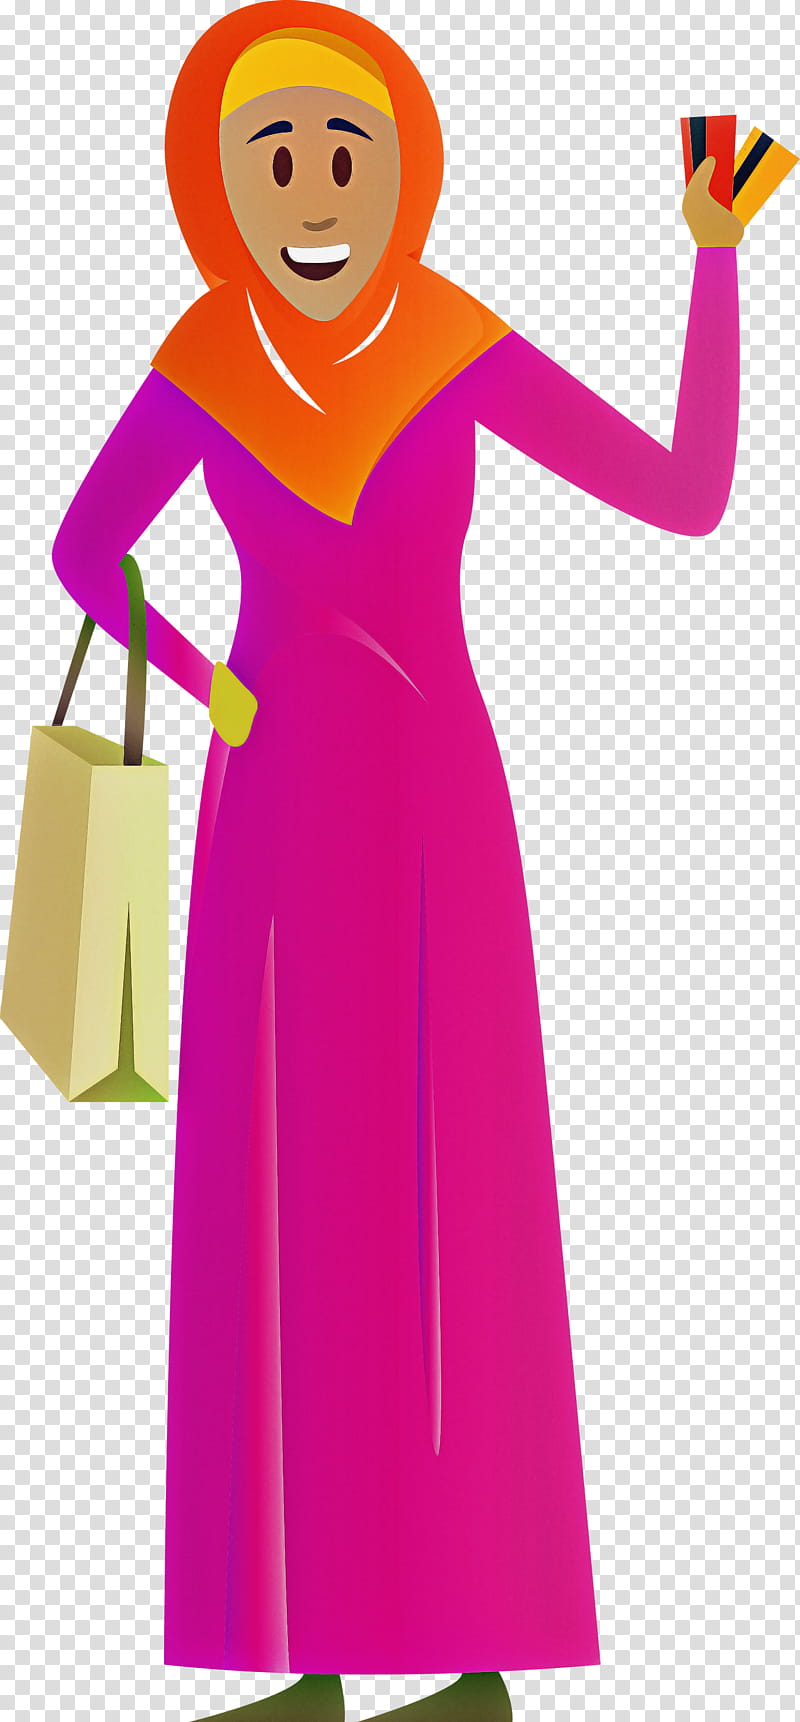 Arabic Woman Arabic Girl, Clothing, Dress, Pink, Yellow, Standing, Purple, Magenta transparent background PNG clipart